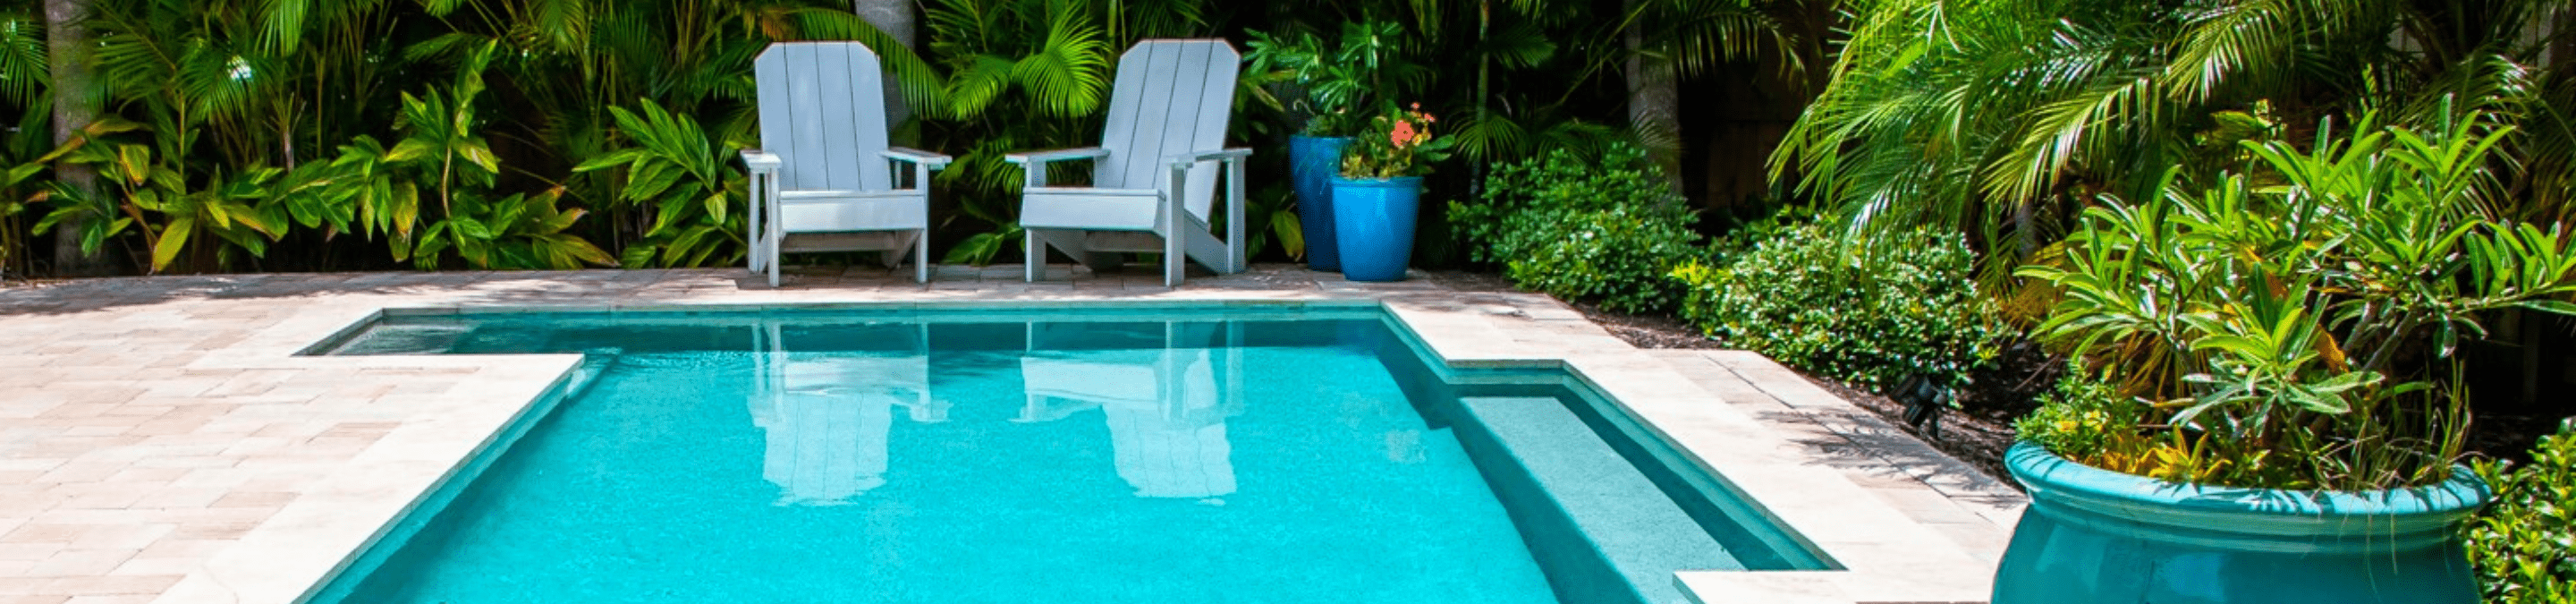 Arectangular pool with two adirondack chairs at the far end of the pool with thick green foliage surrounding the backyard located on Anna Maria Island